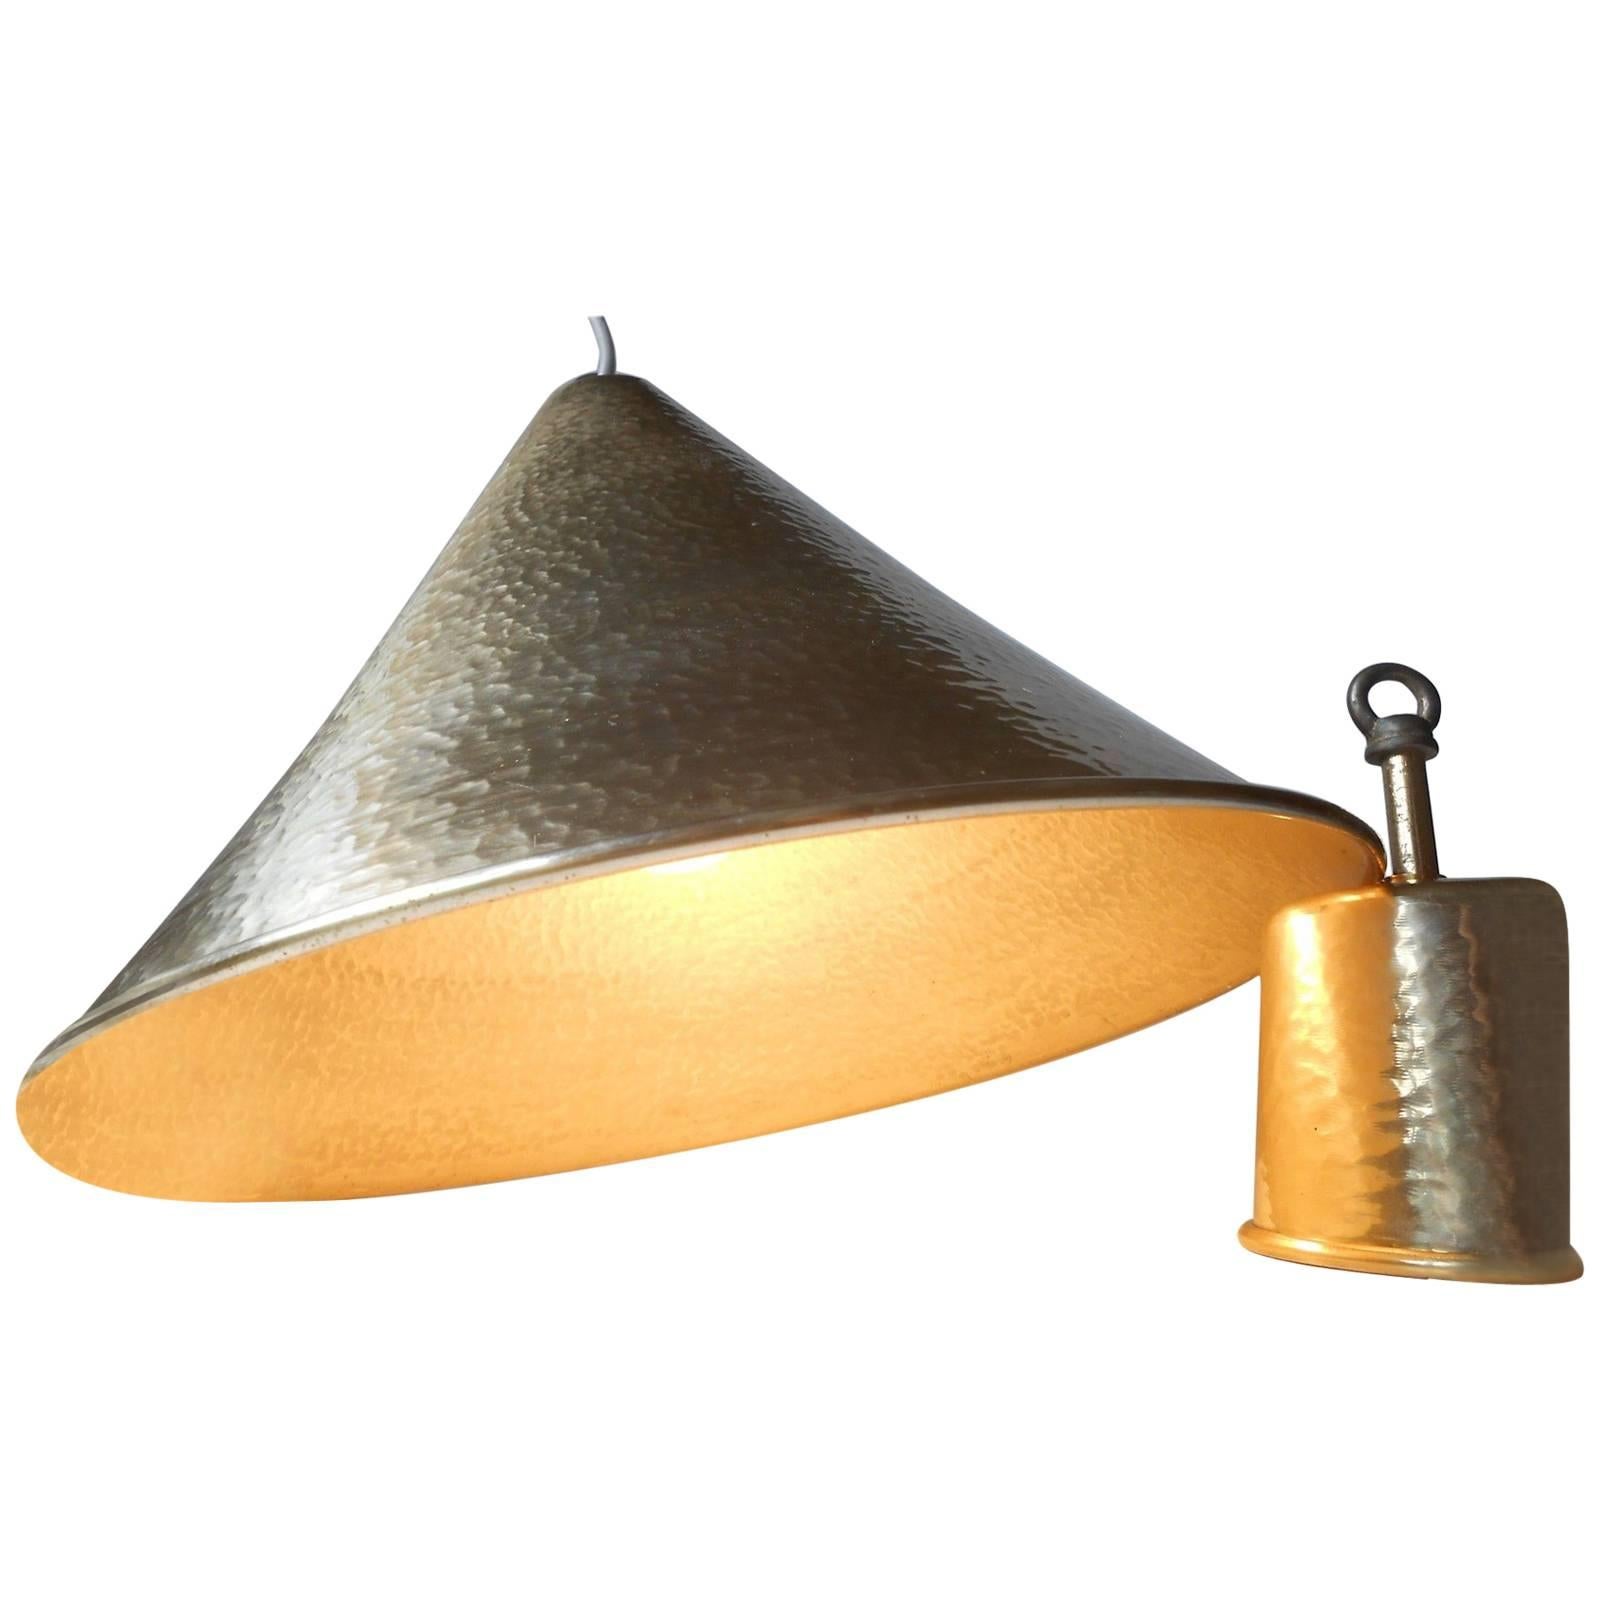 Danish Mid-Century Hammered Brass Hanging Lamp with Matching Canopy, 1960s